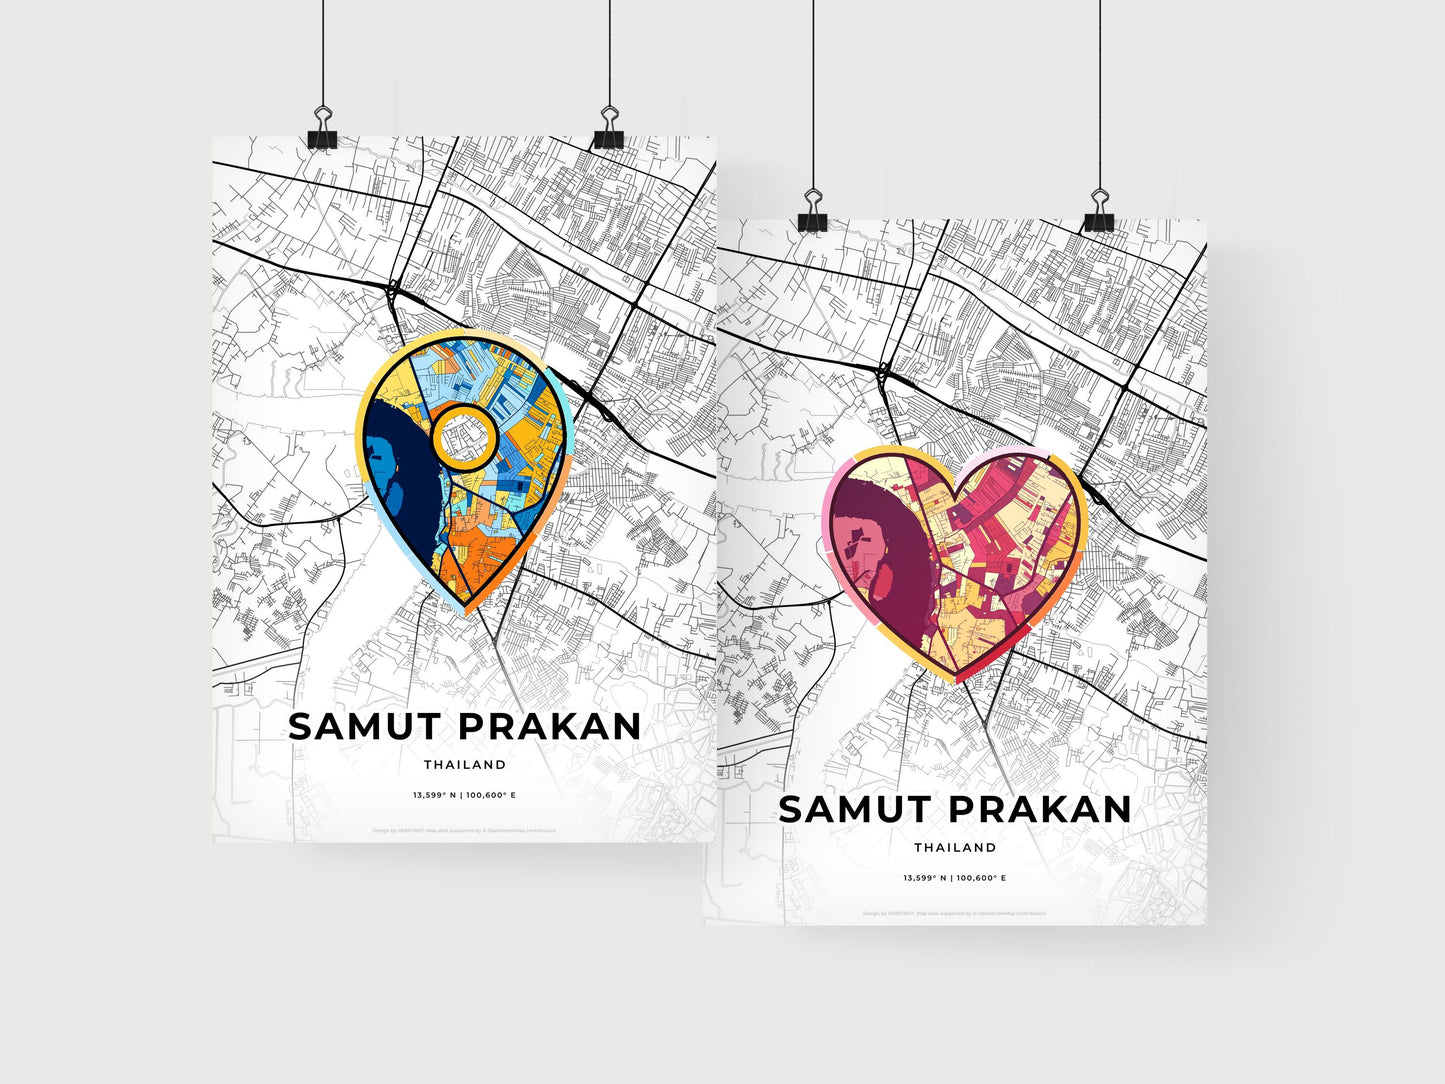 SAMUT PRAKAN THAILAND minimal art map with a colorful icon.